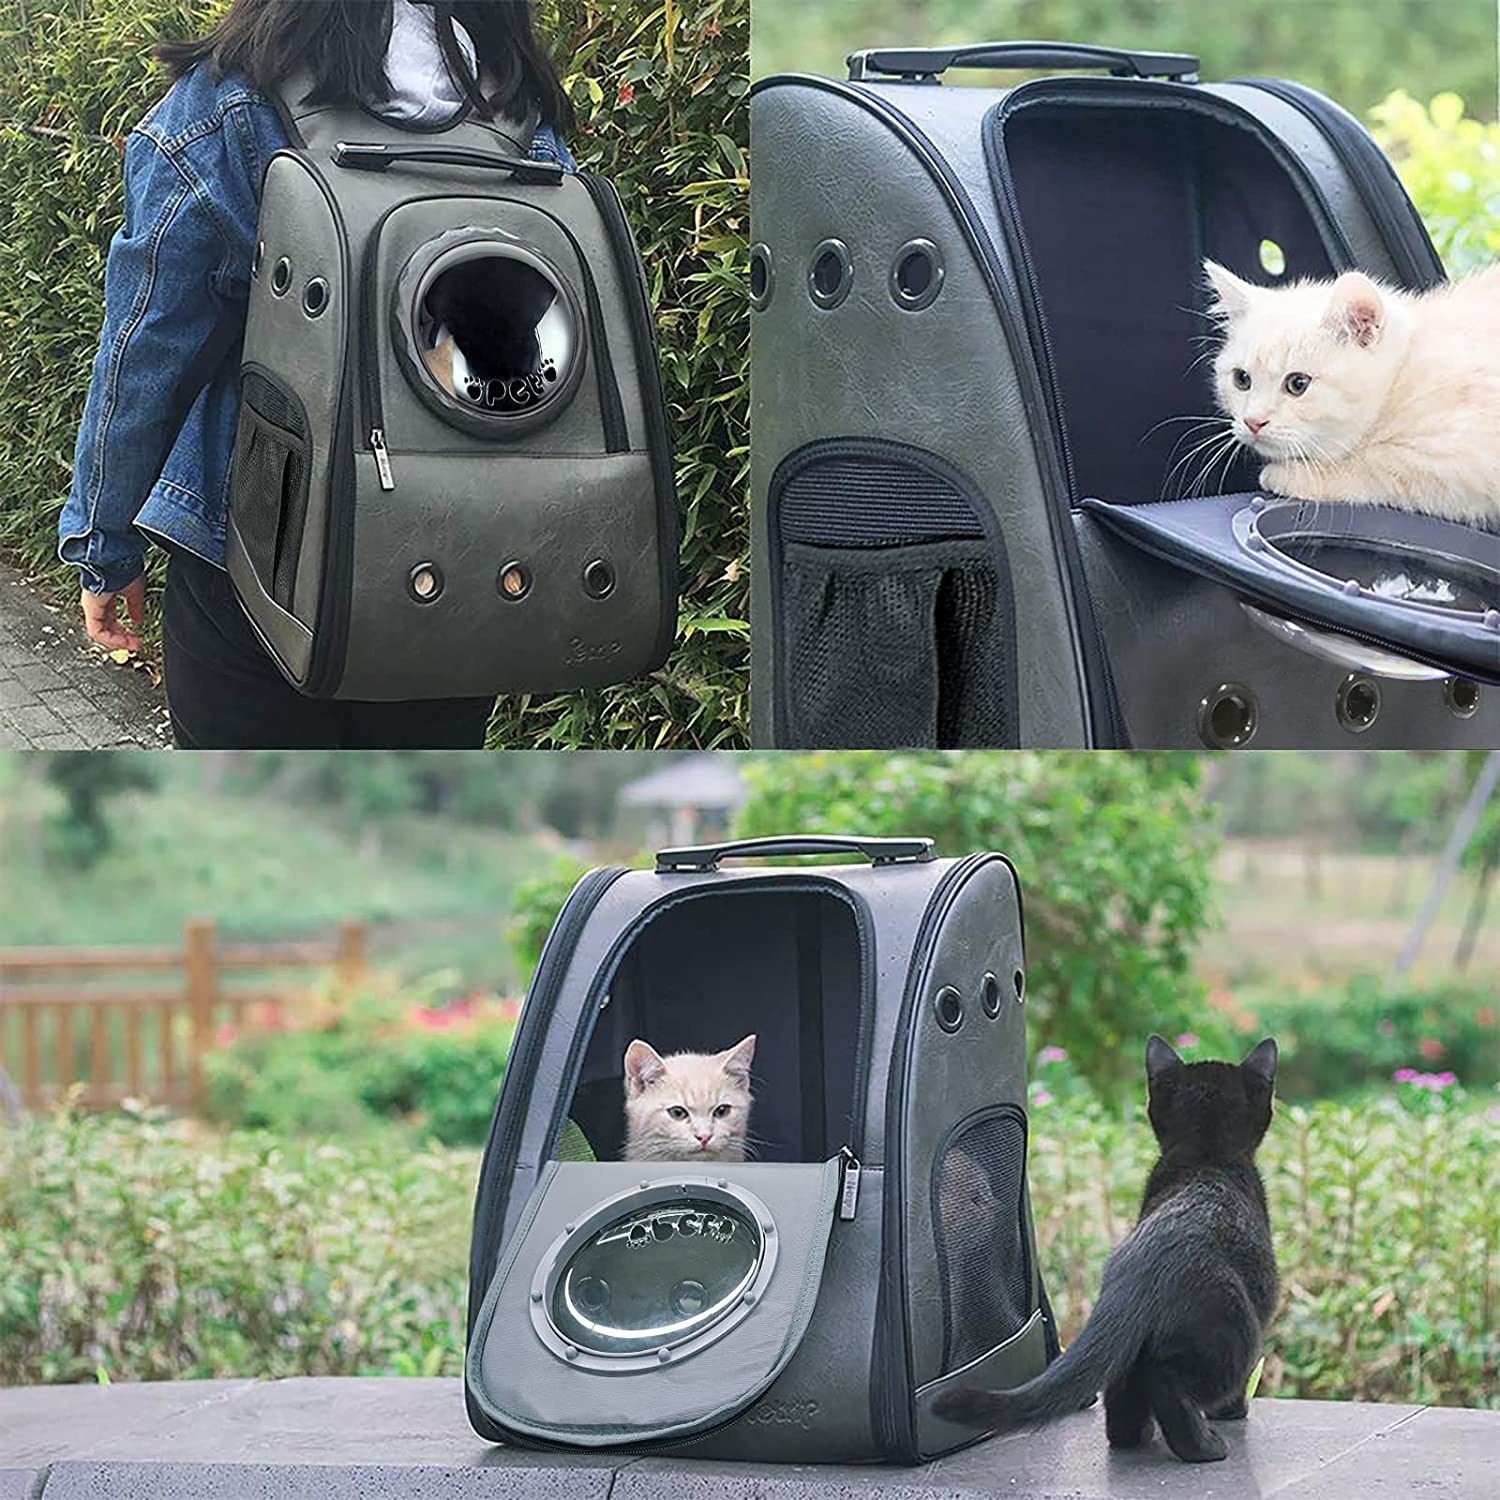 a three-part photo of kittens in and around the backpack